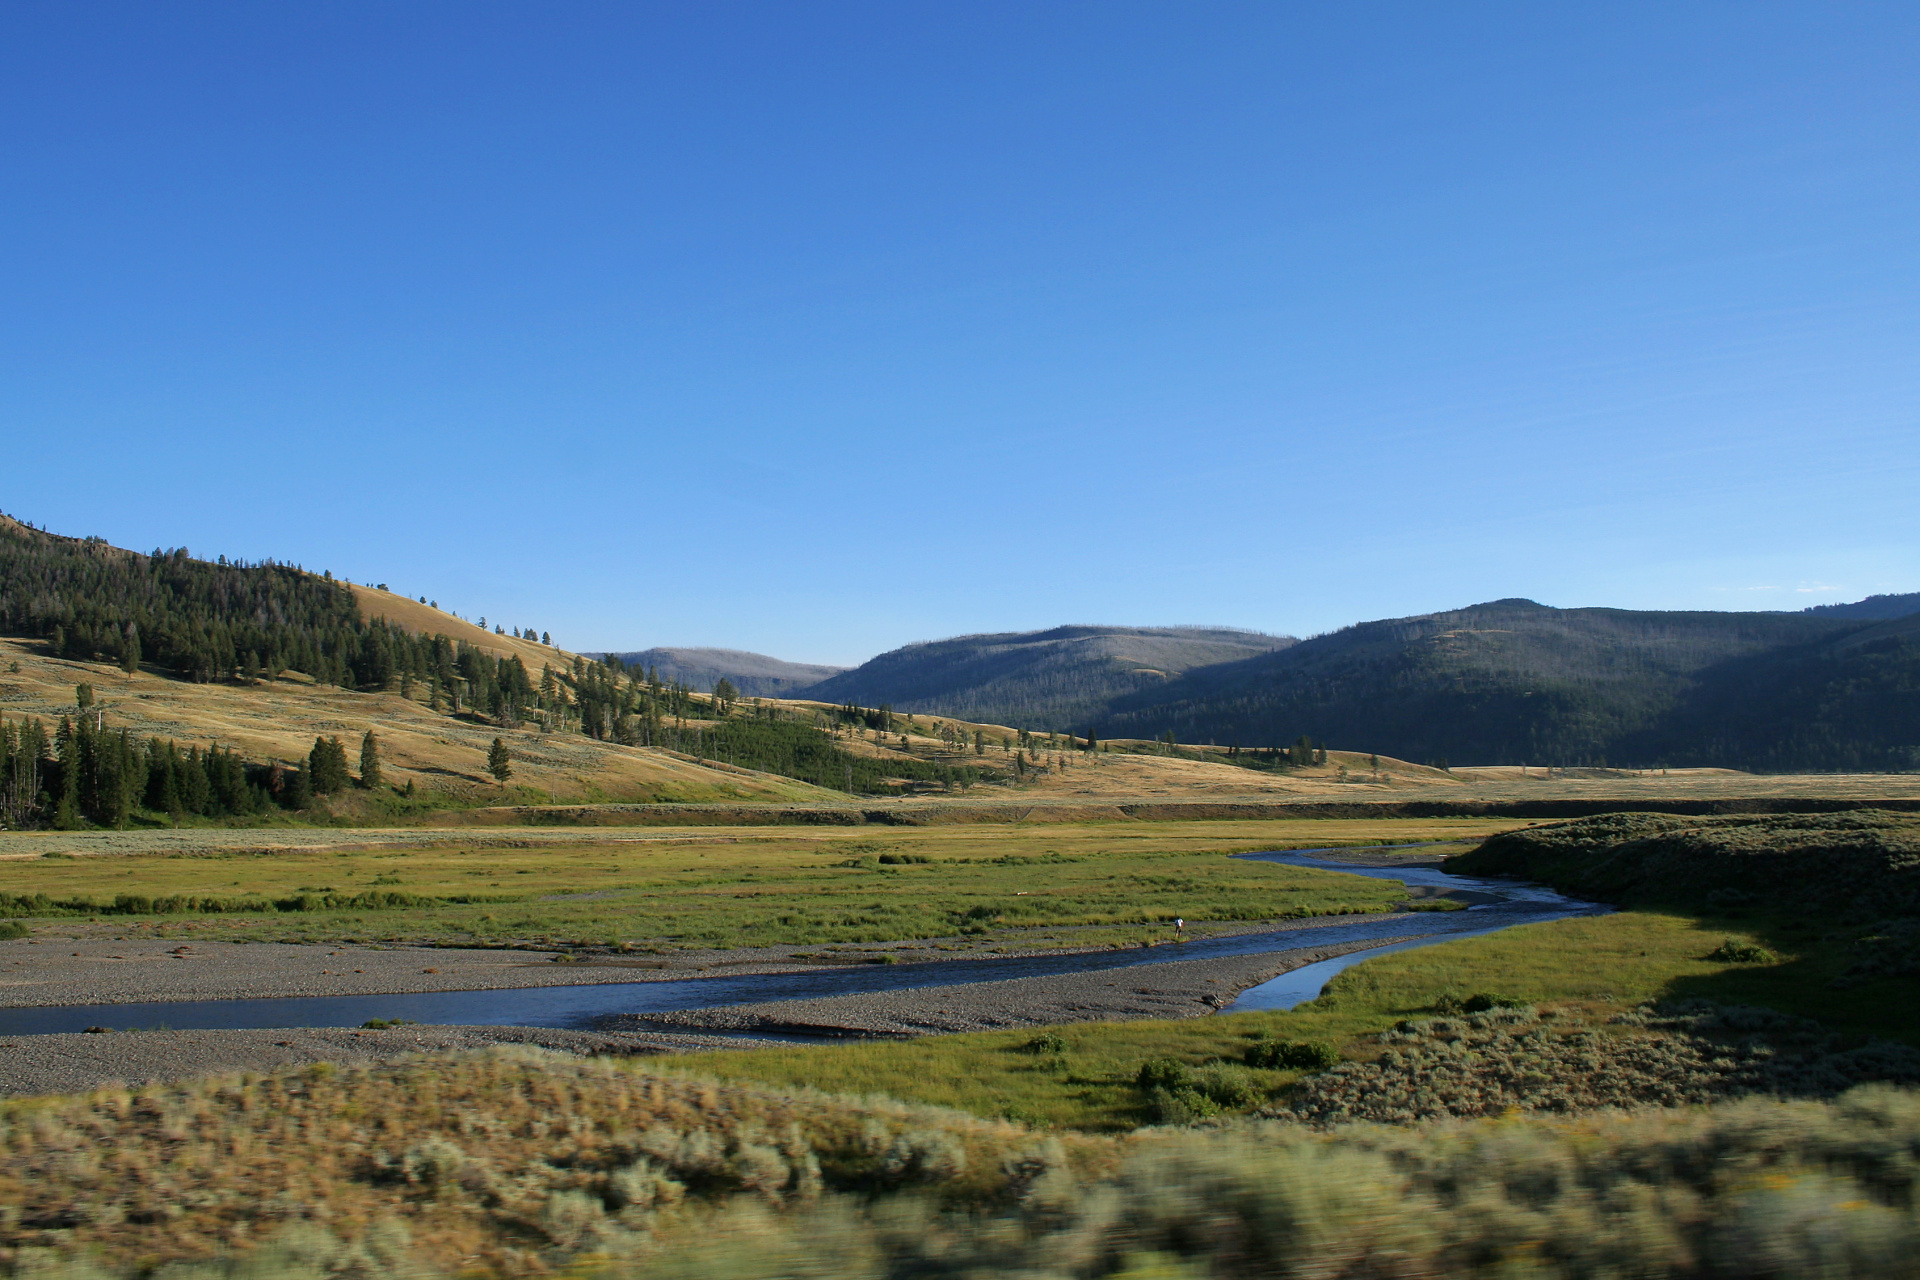 Lamar River (Travels » US Trip 1: Cheyenne Country » The Journey » Yellowstone National Park)